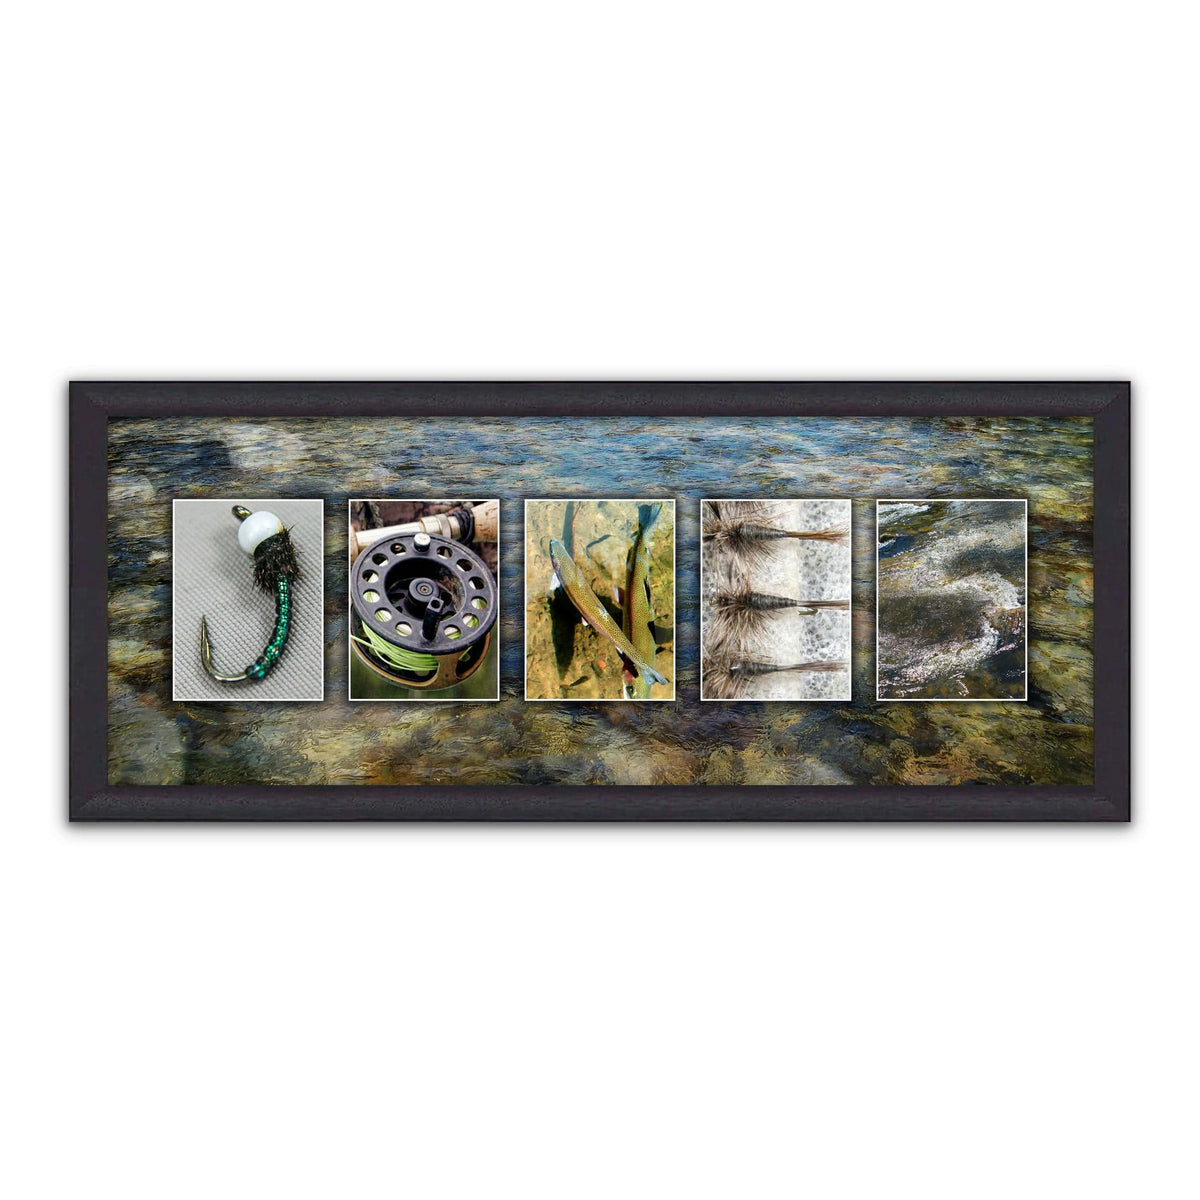 Personal Prints Personalized Fly Fishing Name Art - Perfect for The Fly Fisher Man Cave Office or Boys Room! Block Mount - 9